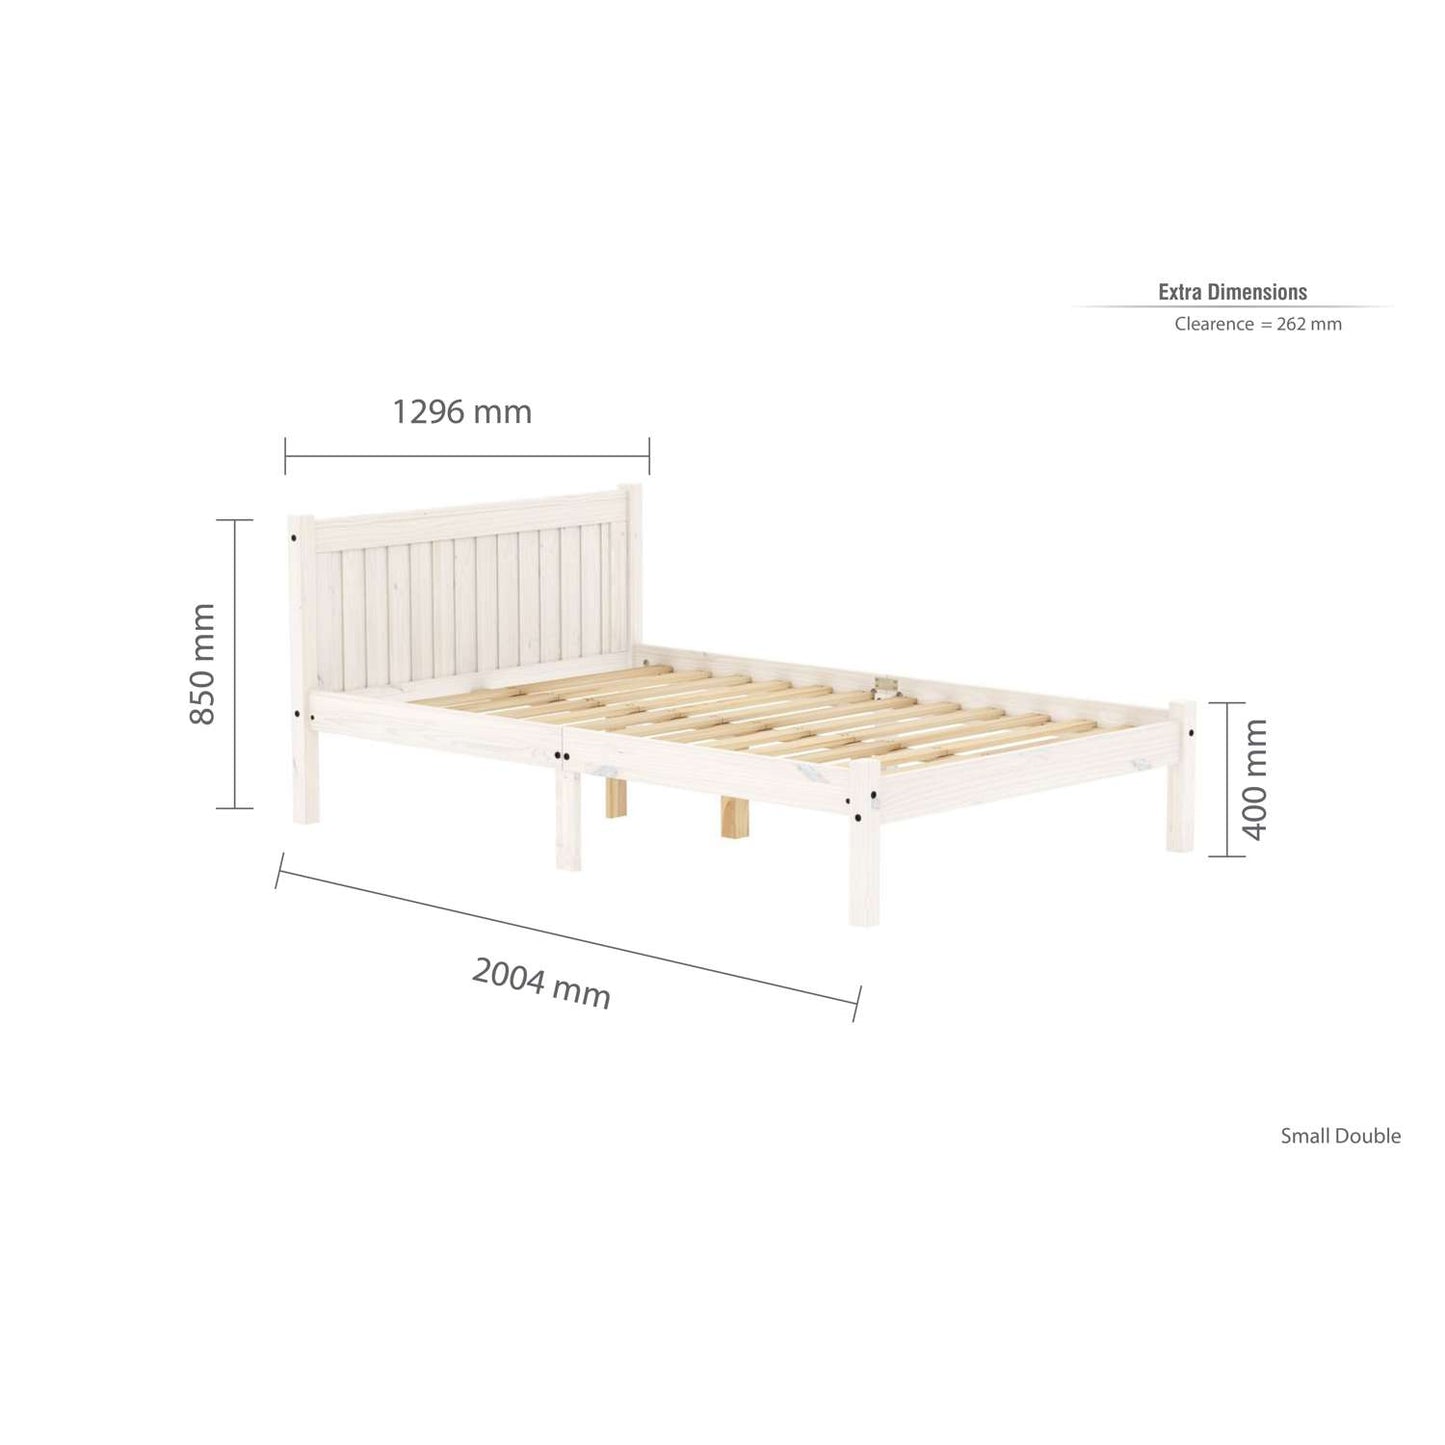 Rio White Washed Bed Frame